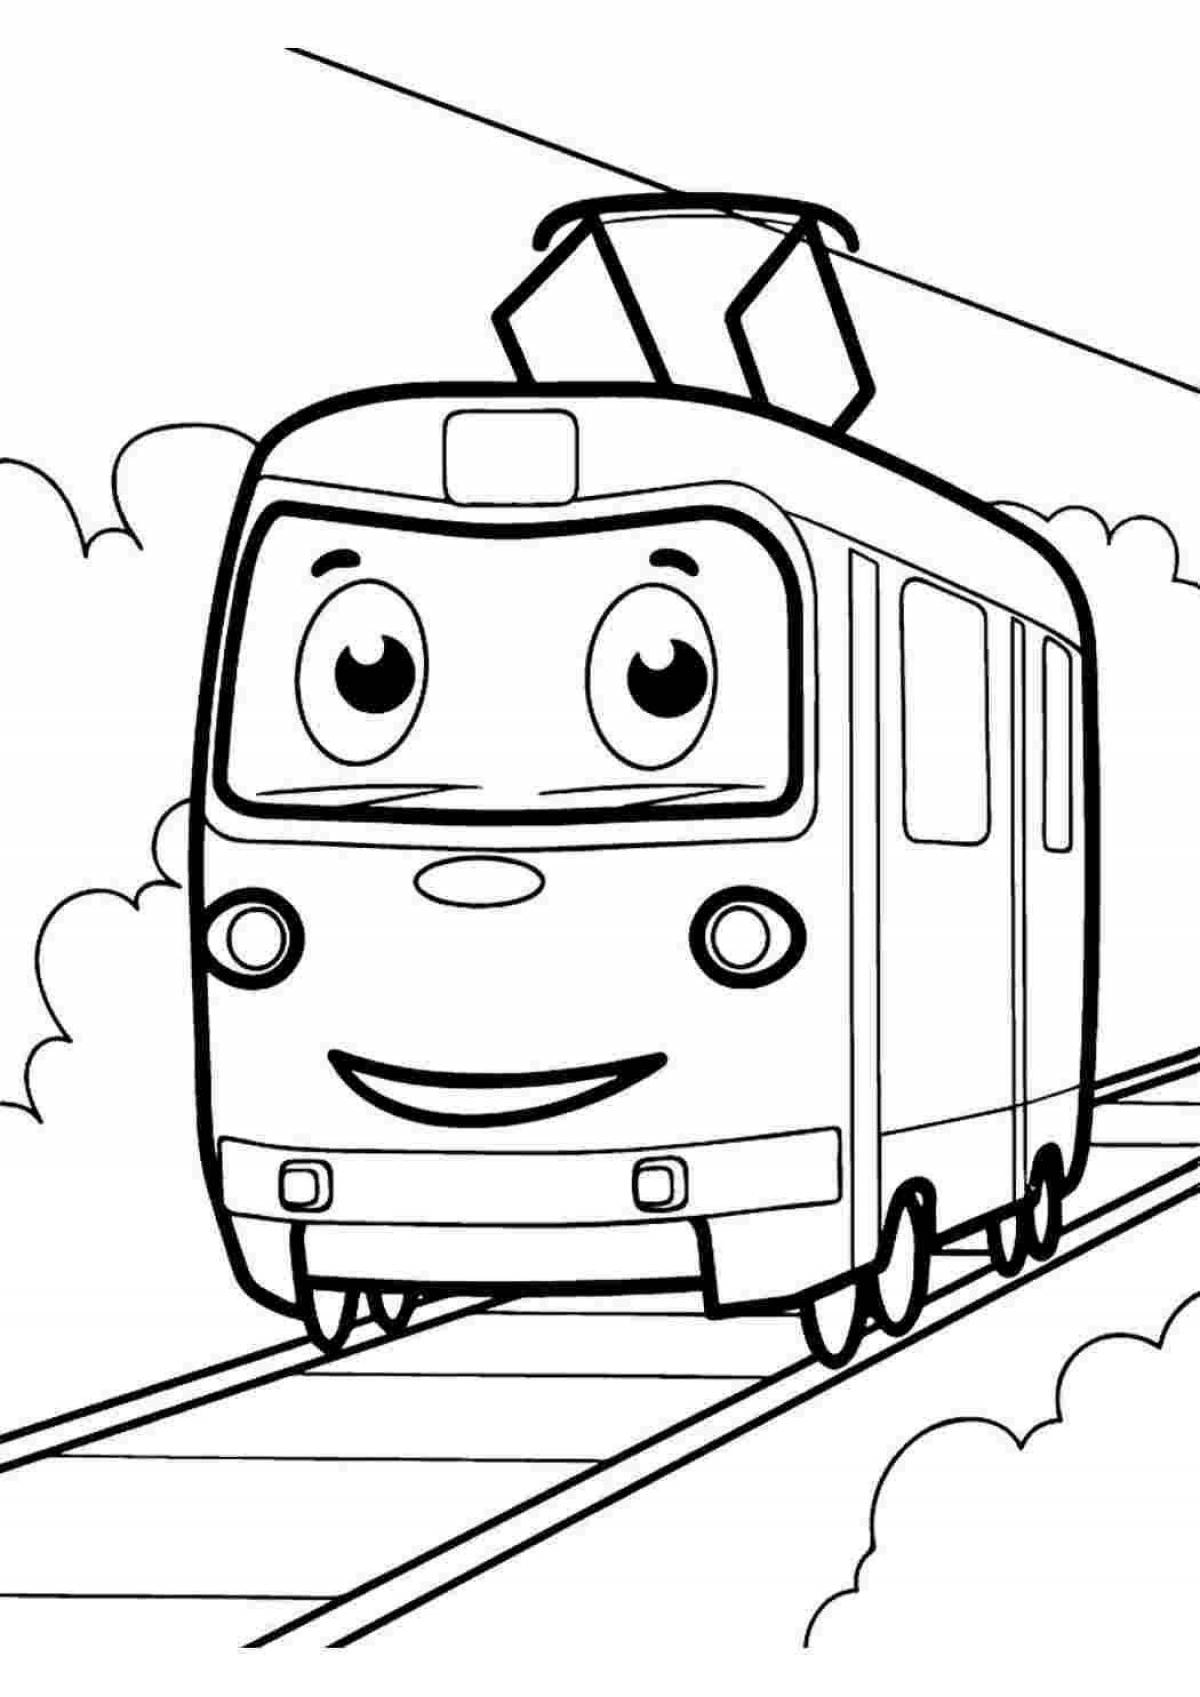 Coloring page great transport for boys